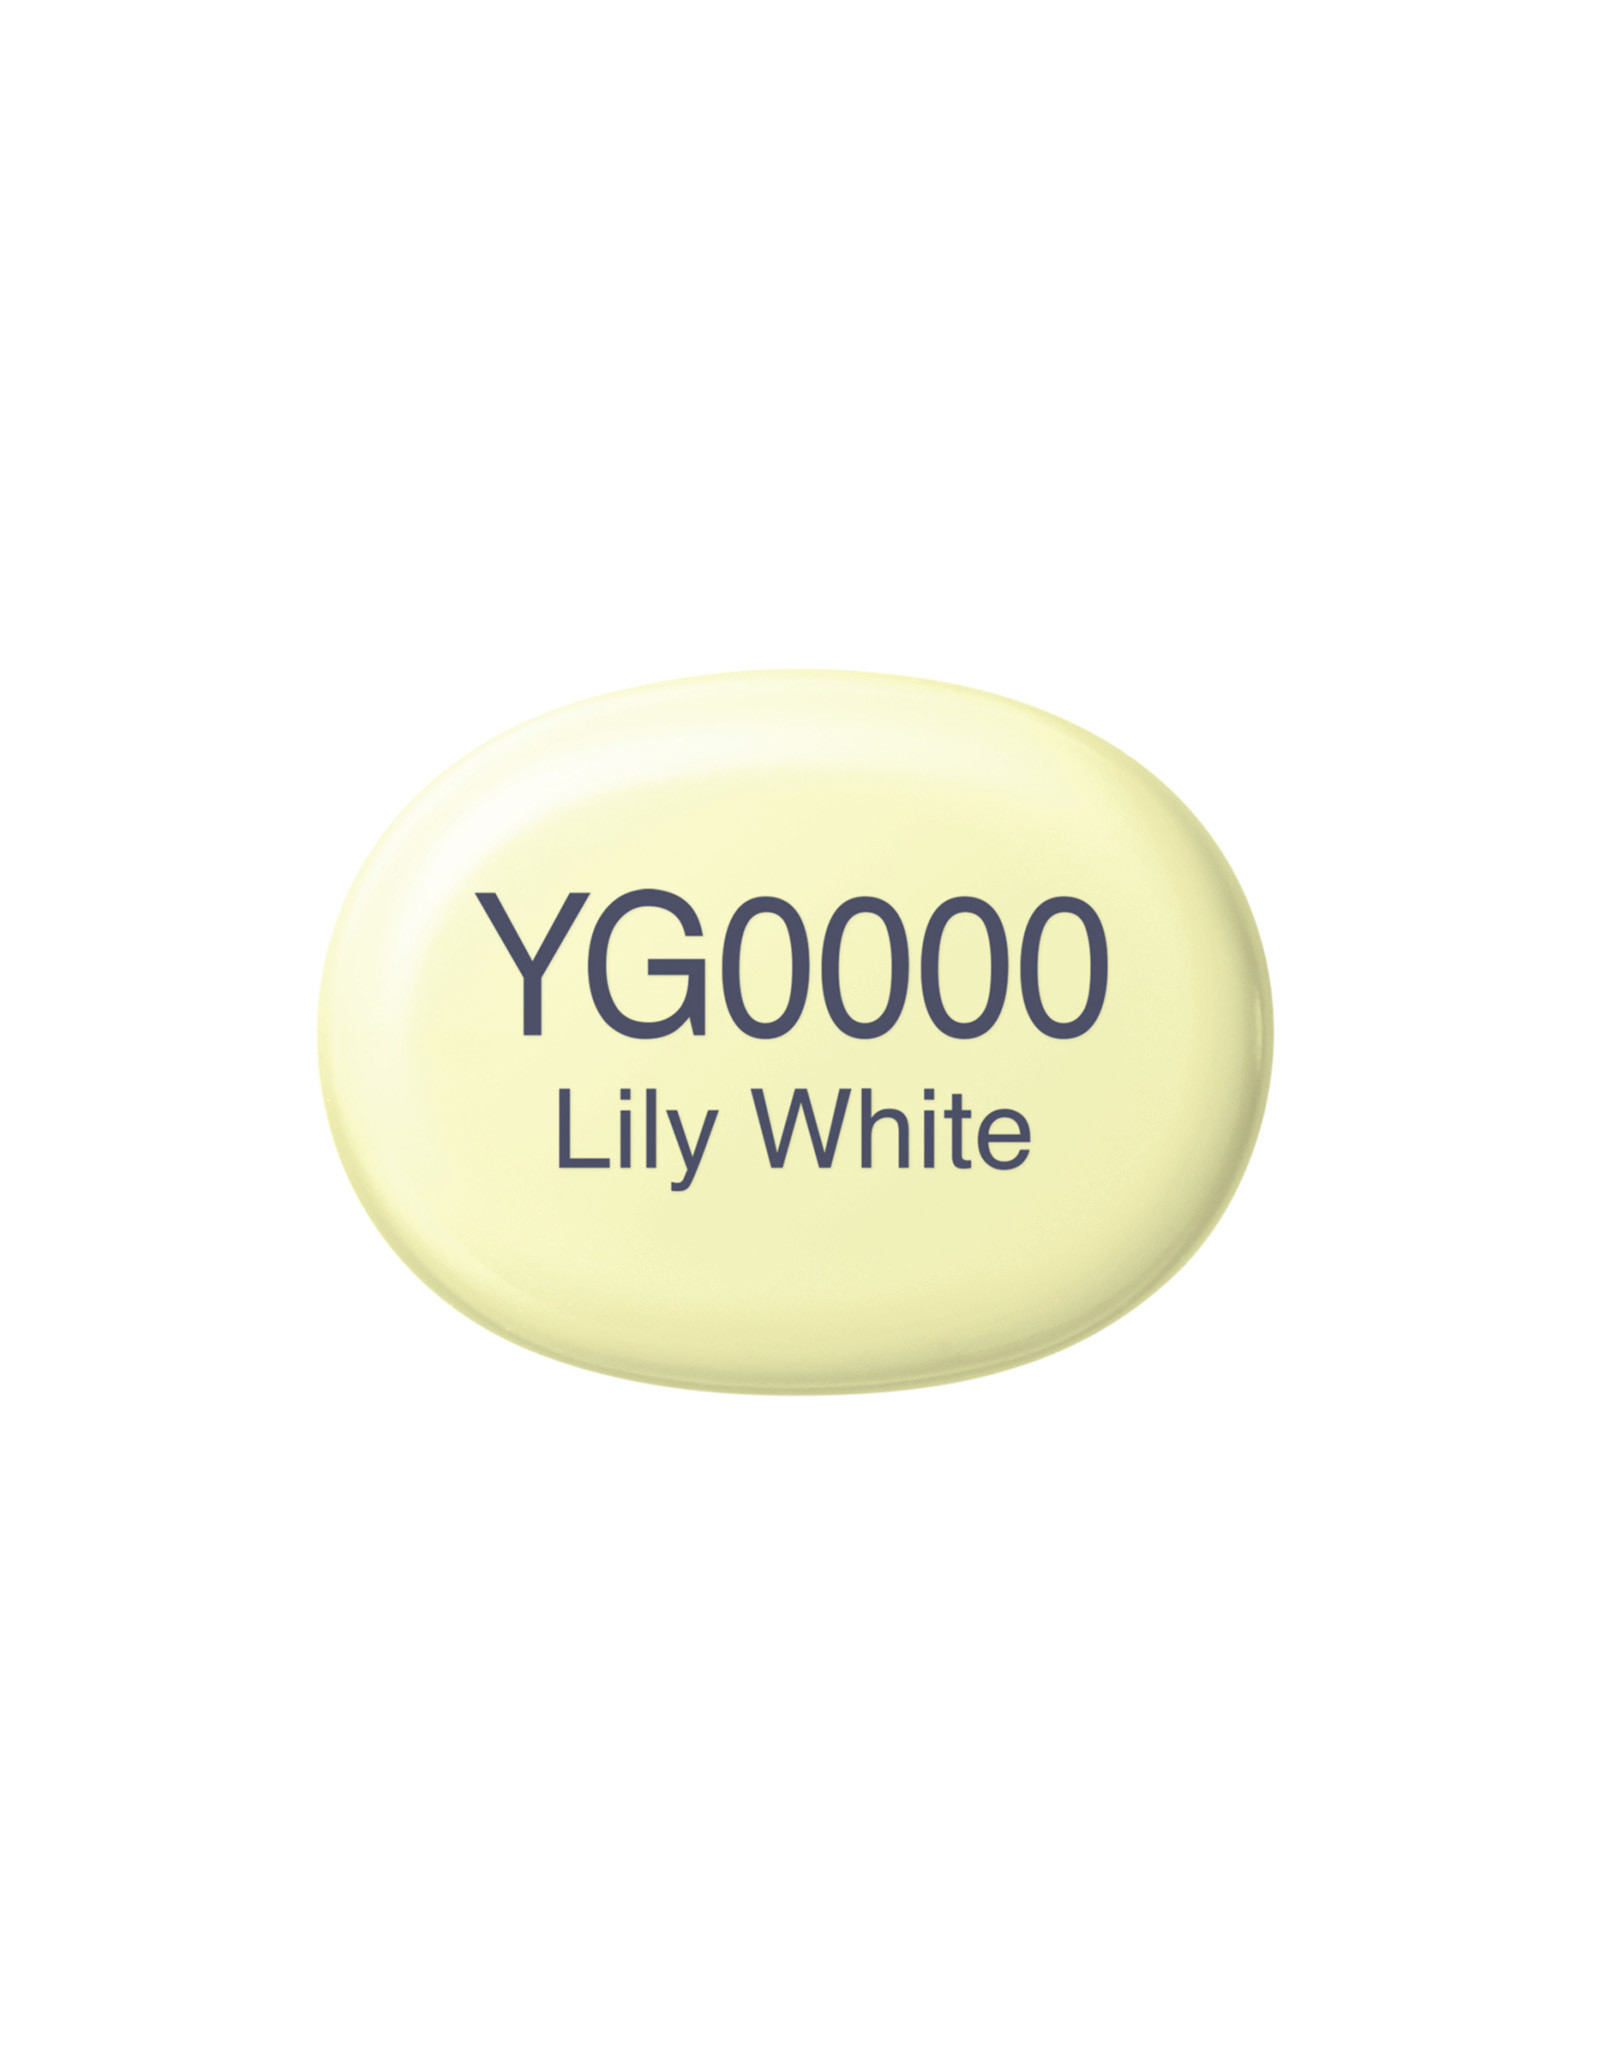 COPIC COPIC Sketch Marker YG0000 Lily White